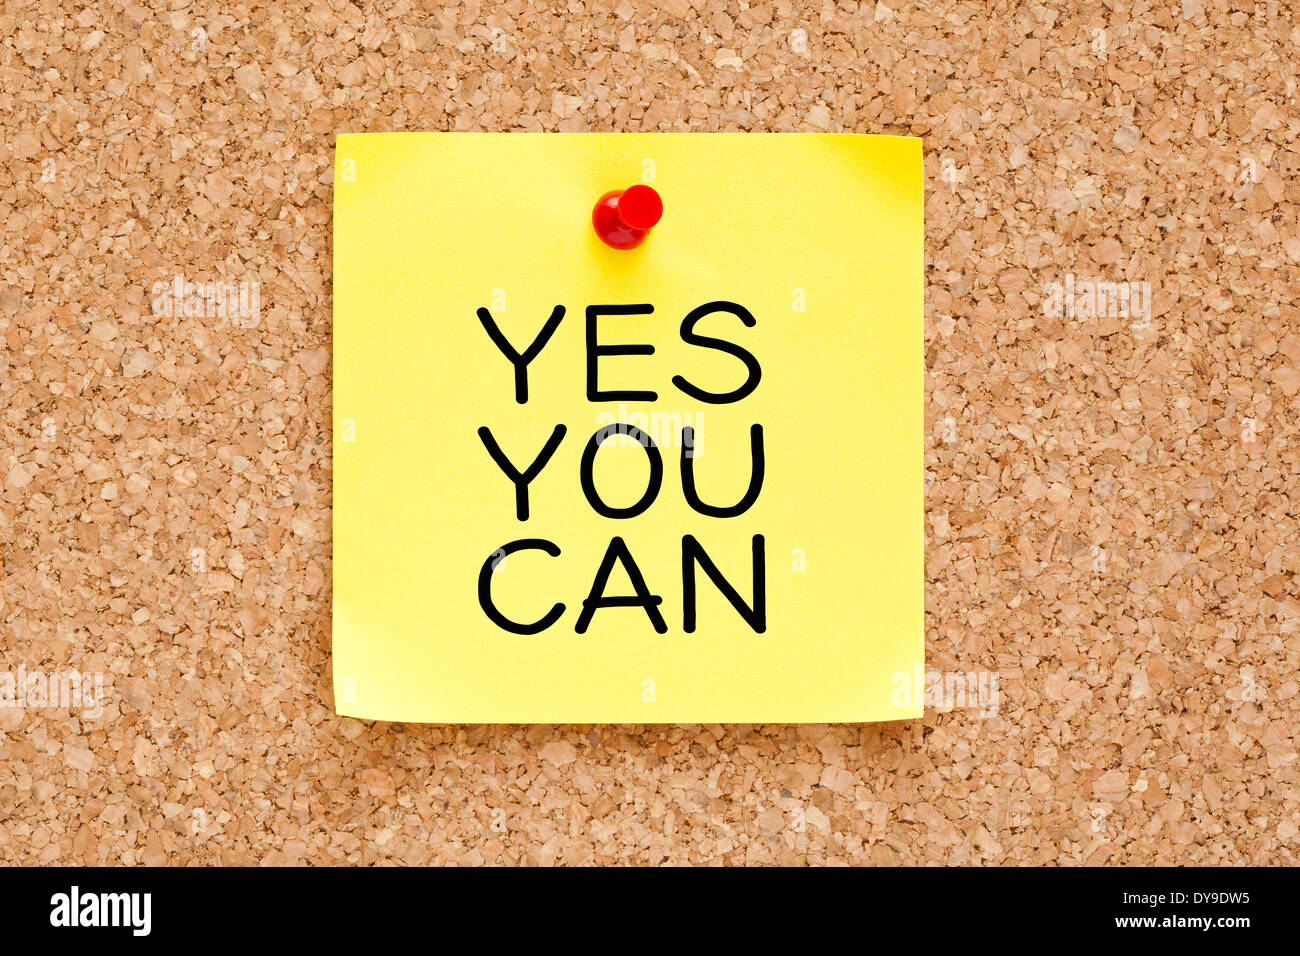 Yes You Can handwritten on yellow sticky note. Stock Photo